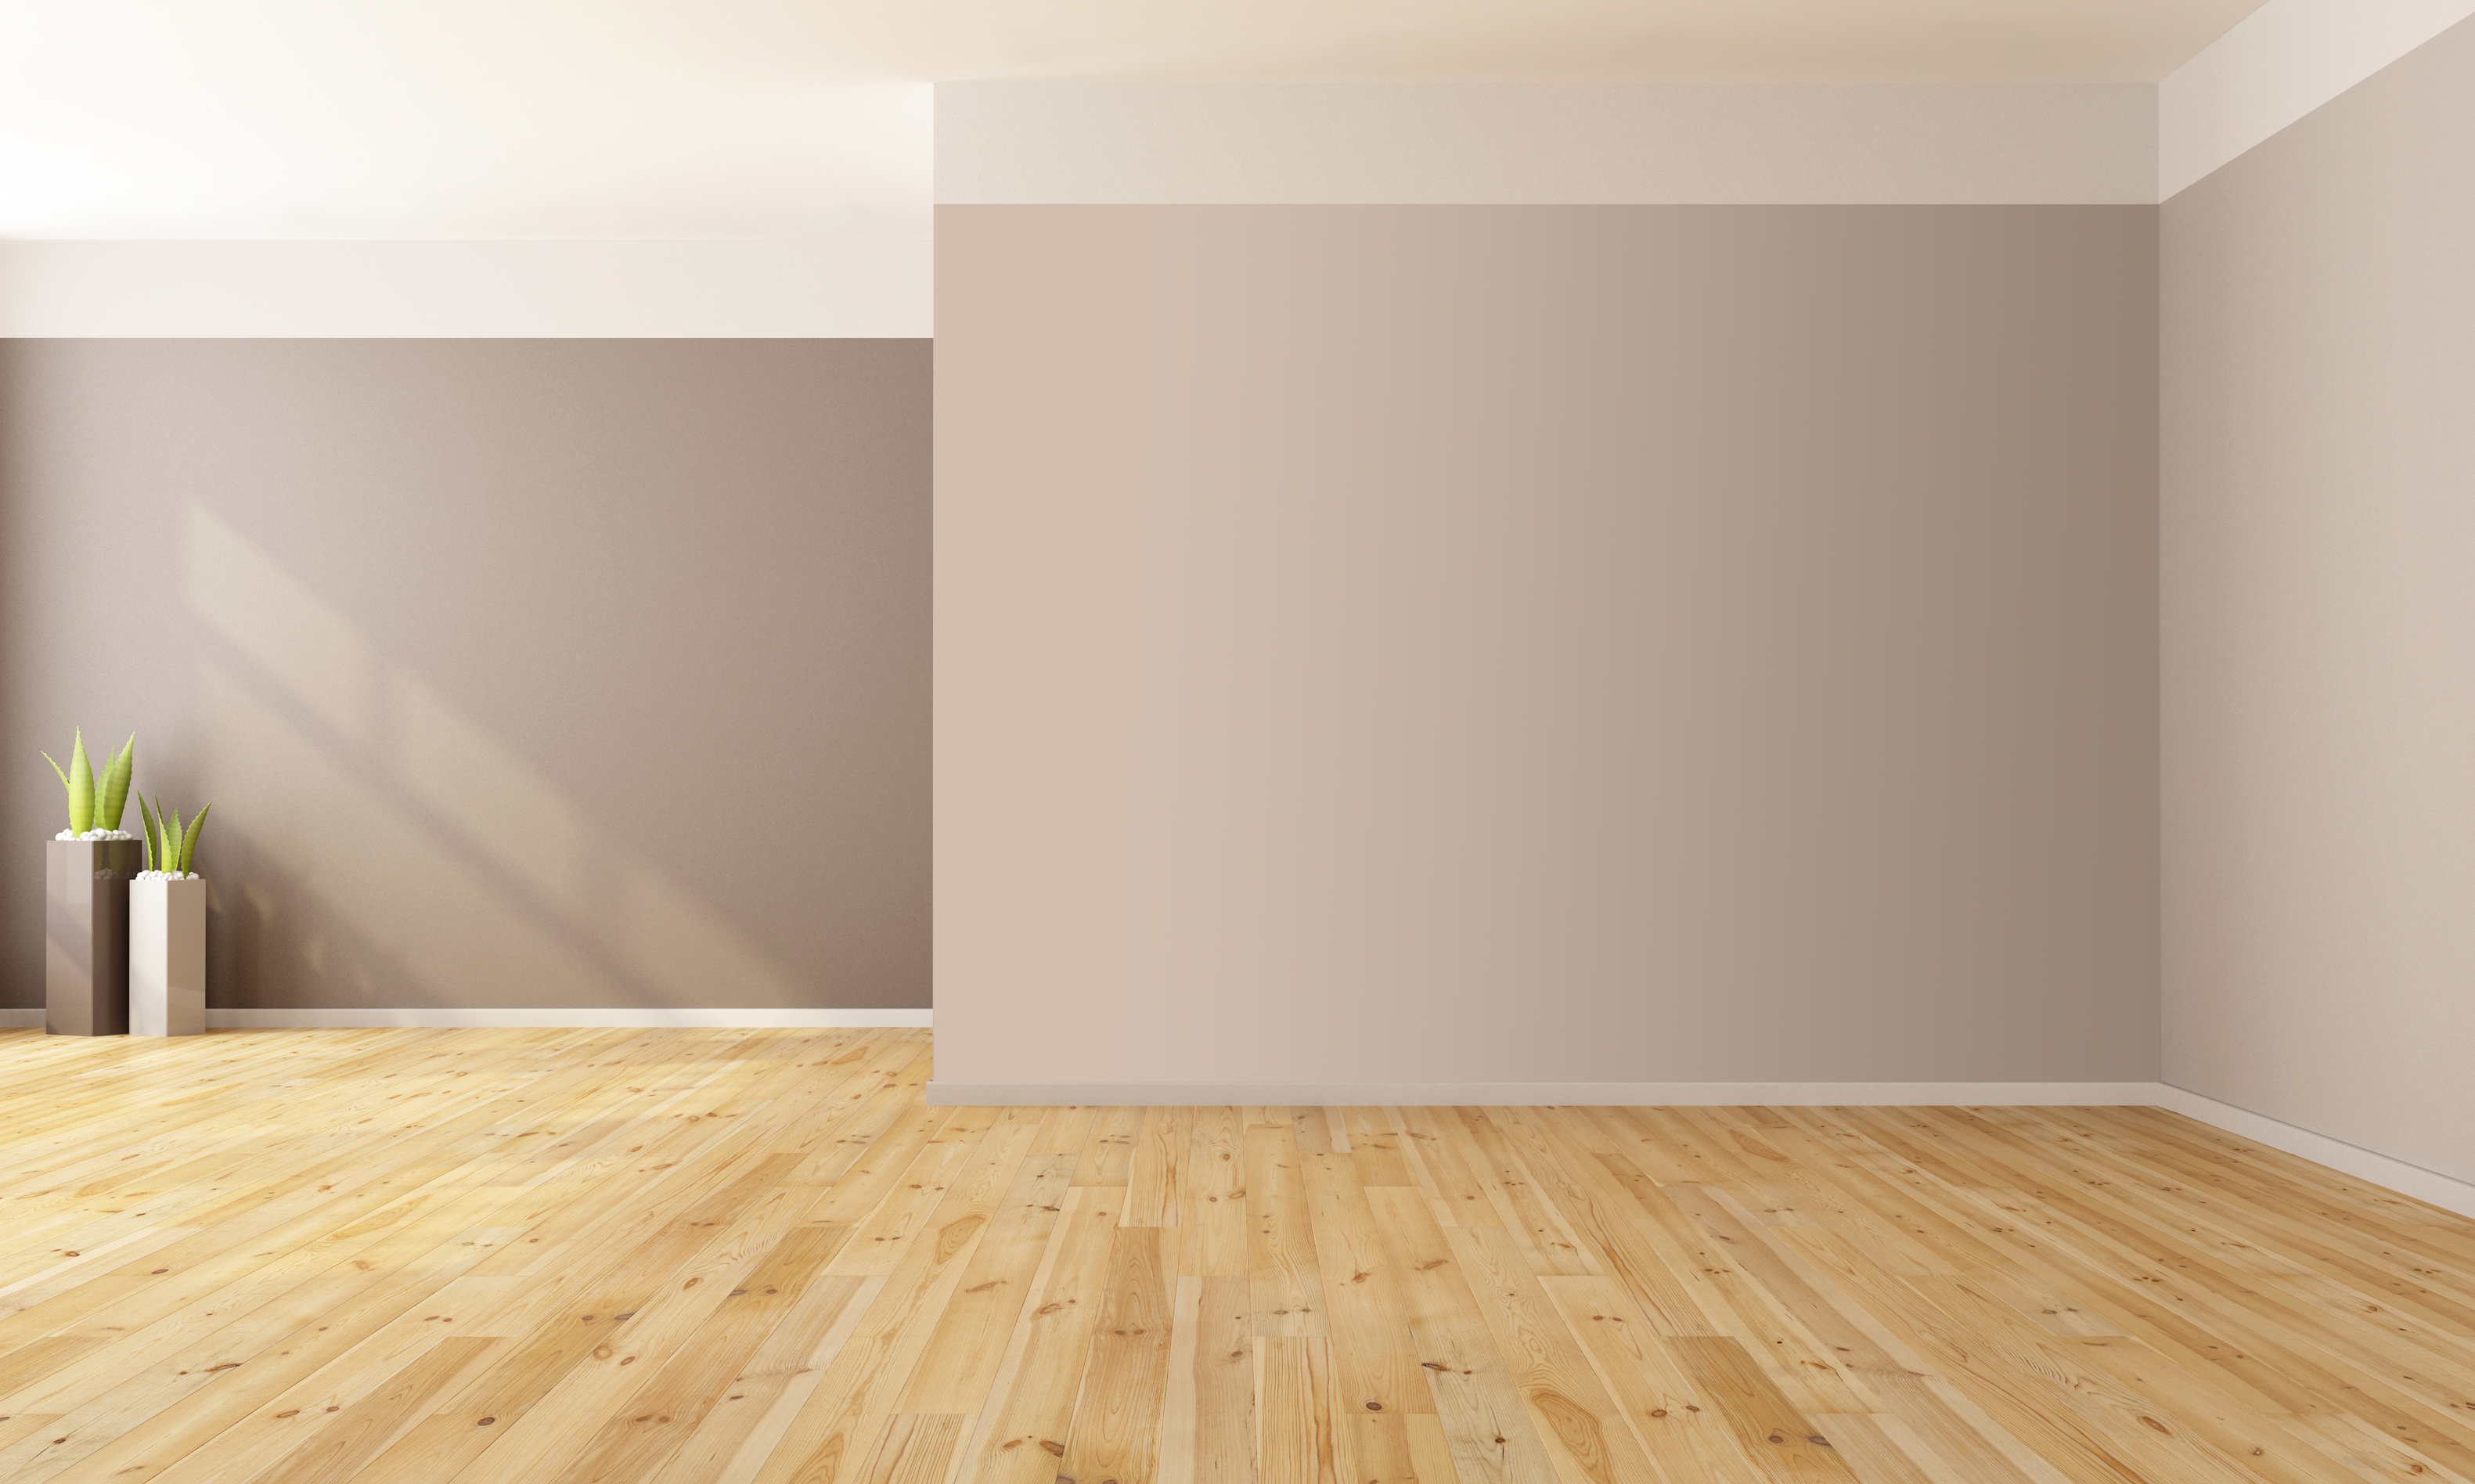 Empty Rooms Background by bubupoodle on DeviantArt